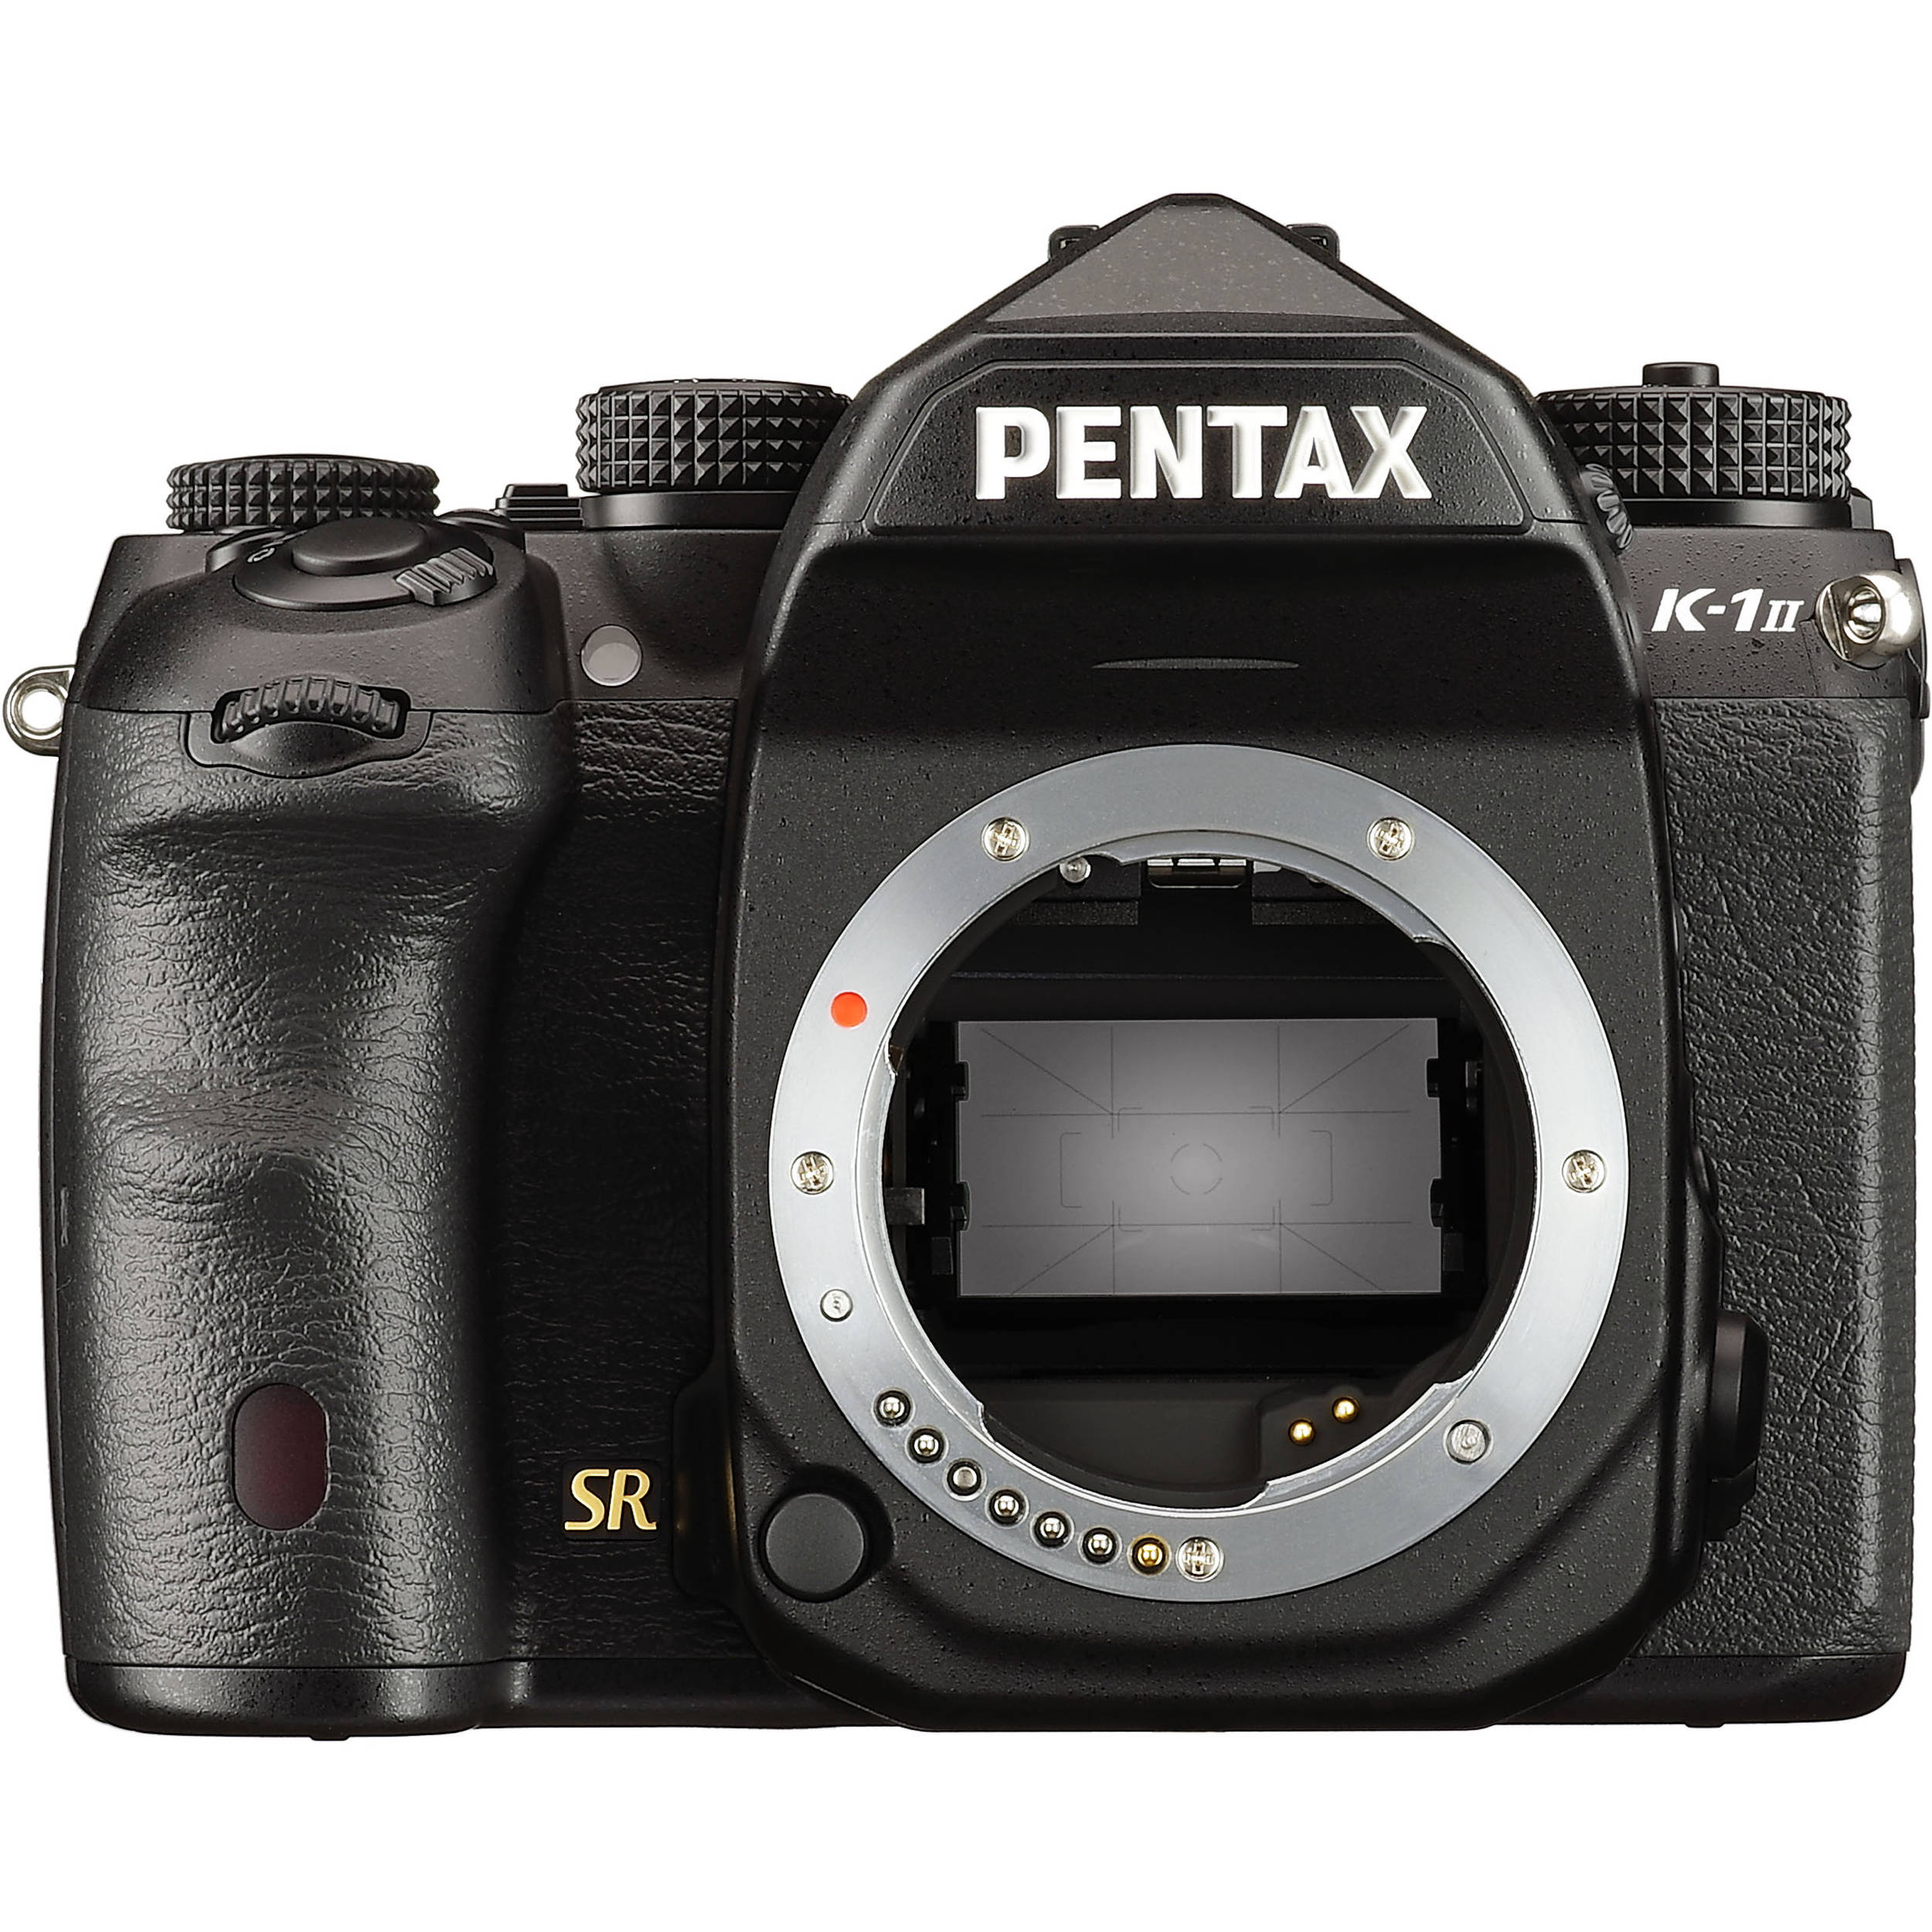 Pentax Cameras and Lenses: Up to 29% Off